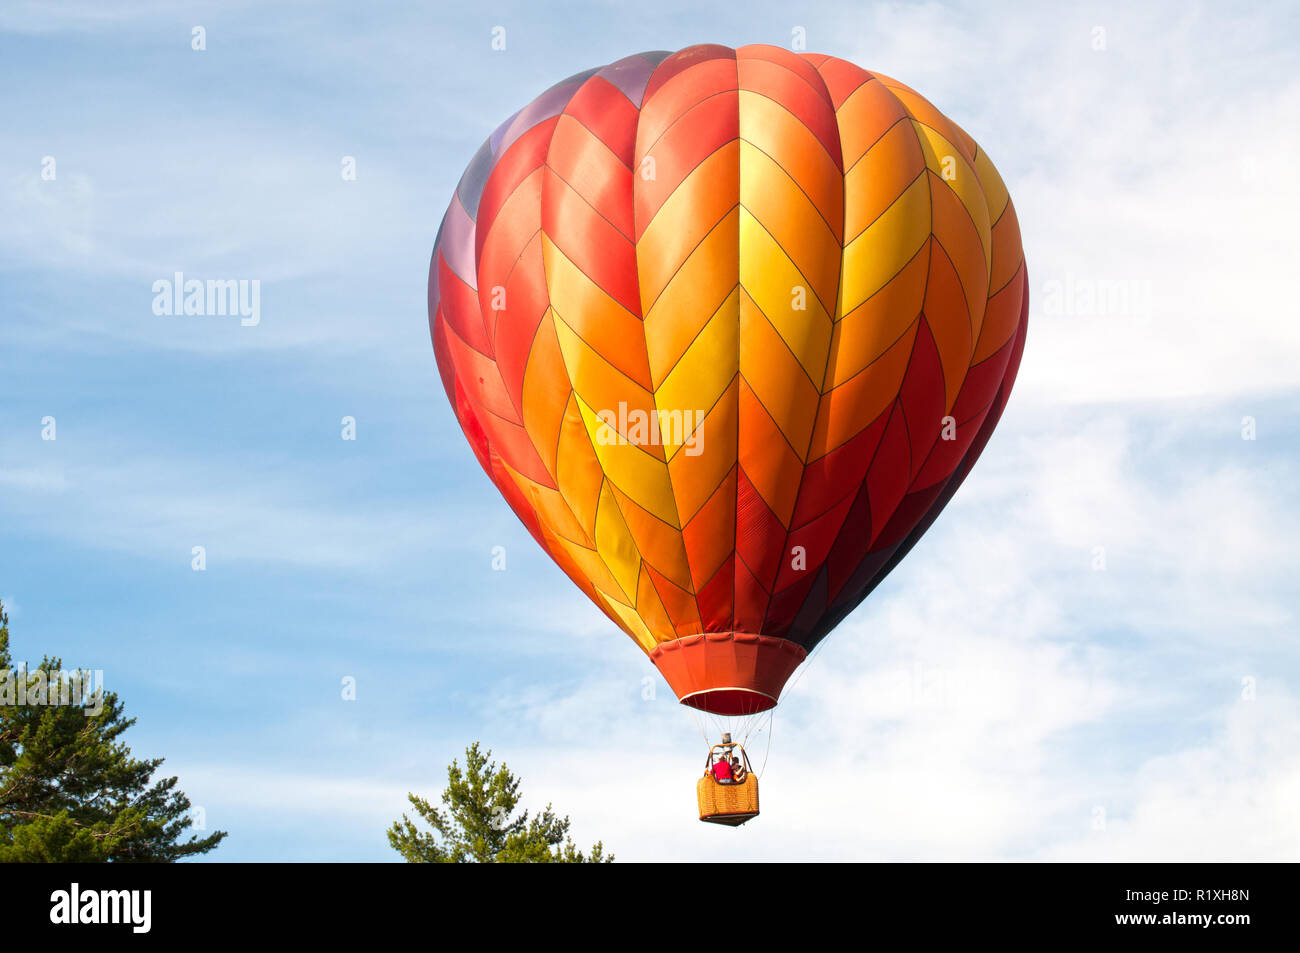 The balance of the air and wind helps float this hot air balloon. Stock Photo